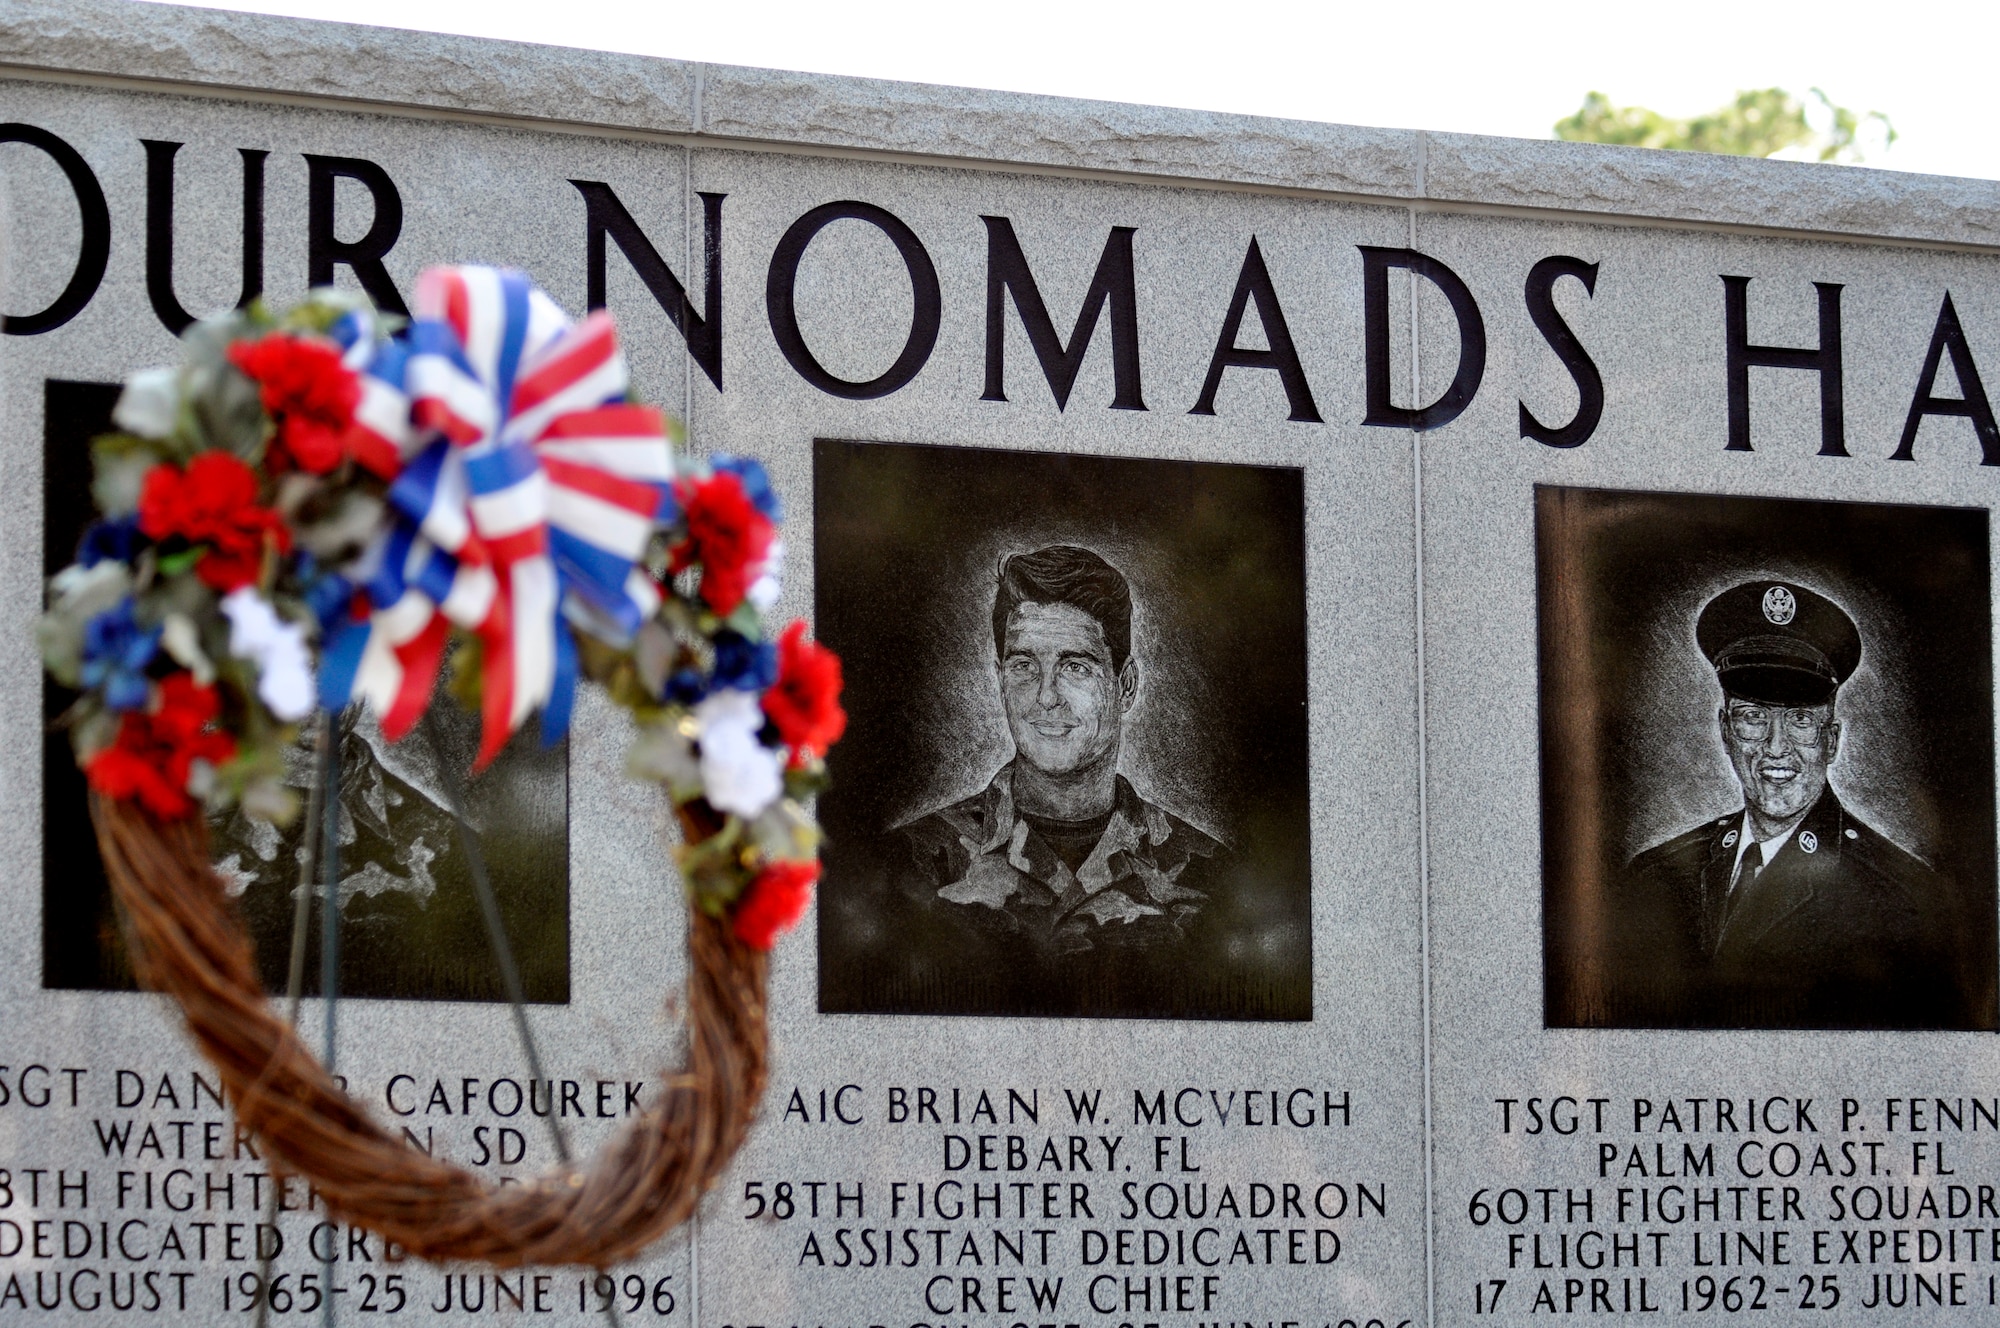 A wreath was placed in front of the Khobar Towers Memorial on the 14th anniversary of the tragedy during a ceremony June 25 at Eglin Air Force Base, Fla.  Almost 100 friends, family and current members of the 33rd Fighter Wing gathered for a remembrance ceremony near the memorial dedicated to the heroism of 12 Airmen lost. The 33rd FW suffered 105 wounded personnel and accounted for 12 of the 19 Airmen killed in the Khobar Towers terrorist attack June 25, 1996. (U.S. Air Force Photo/ Samuel King Jr.) 